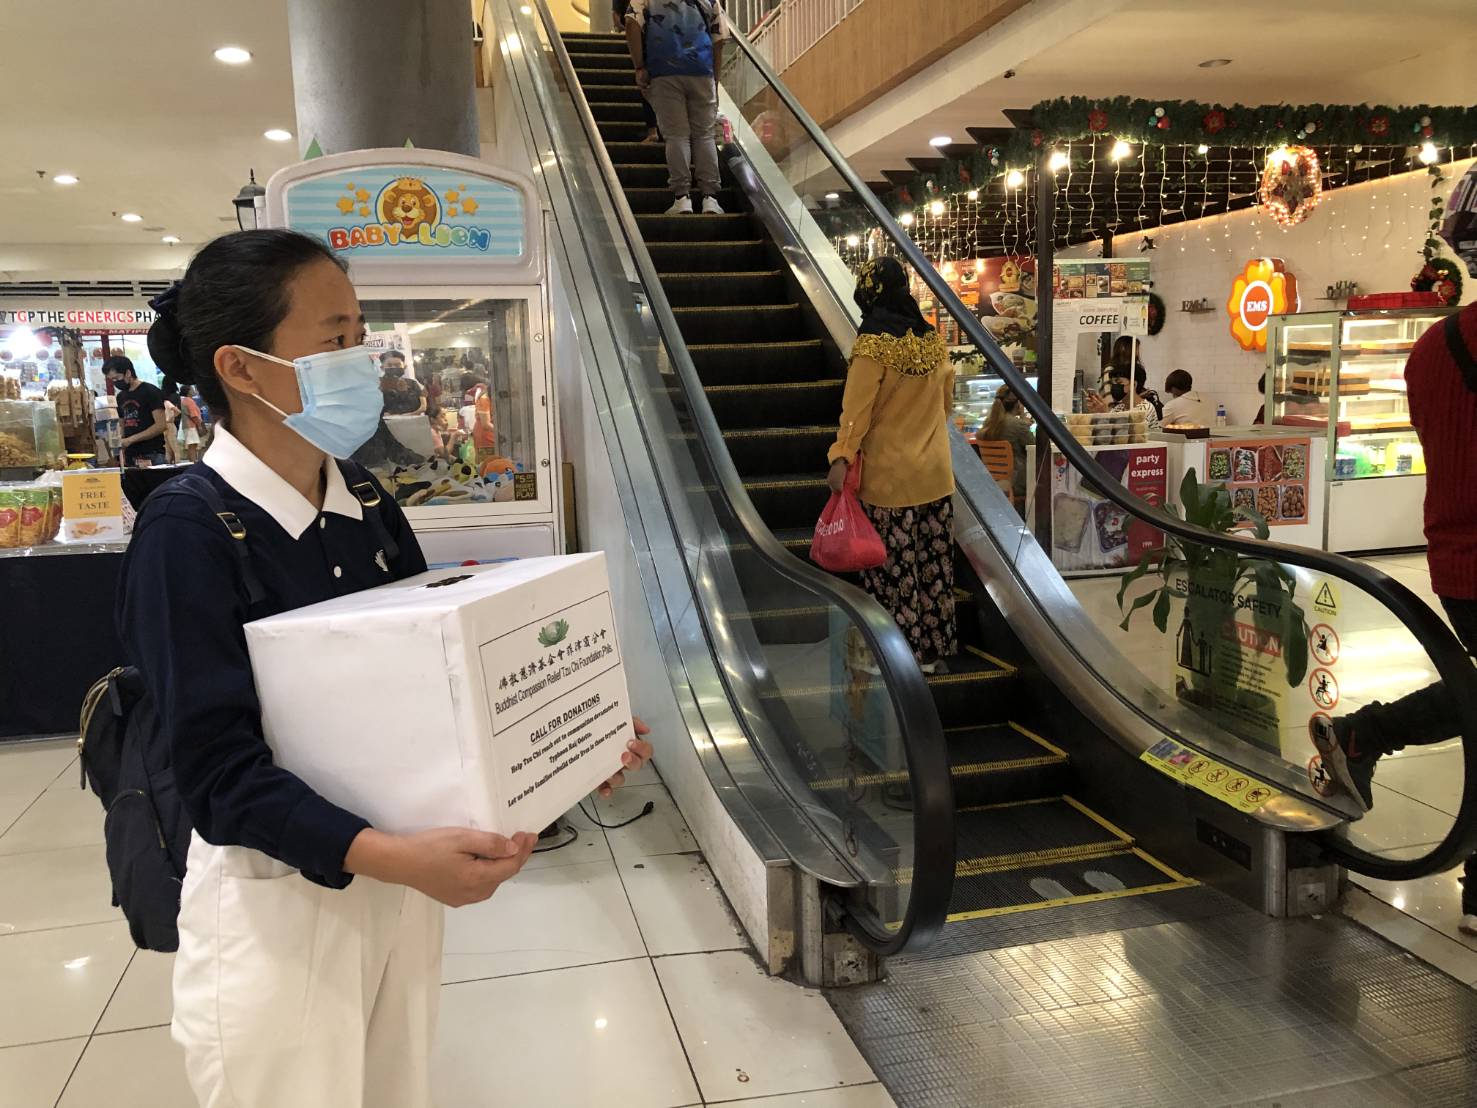 A volunteer waits patiently for shoppers by an escalator. 